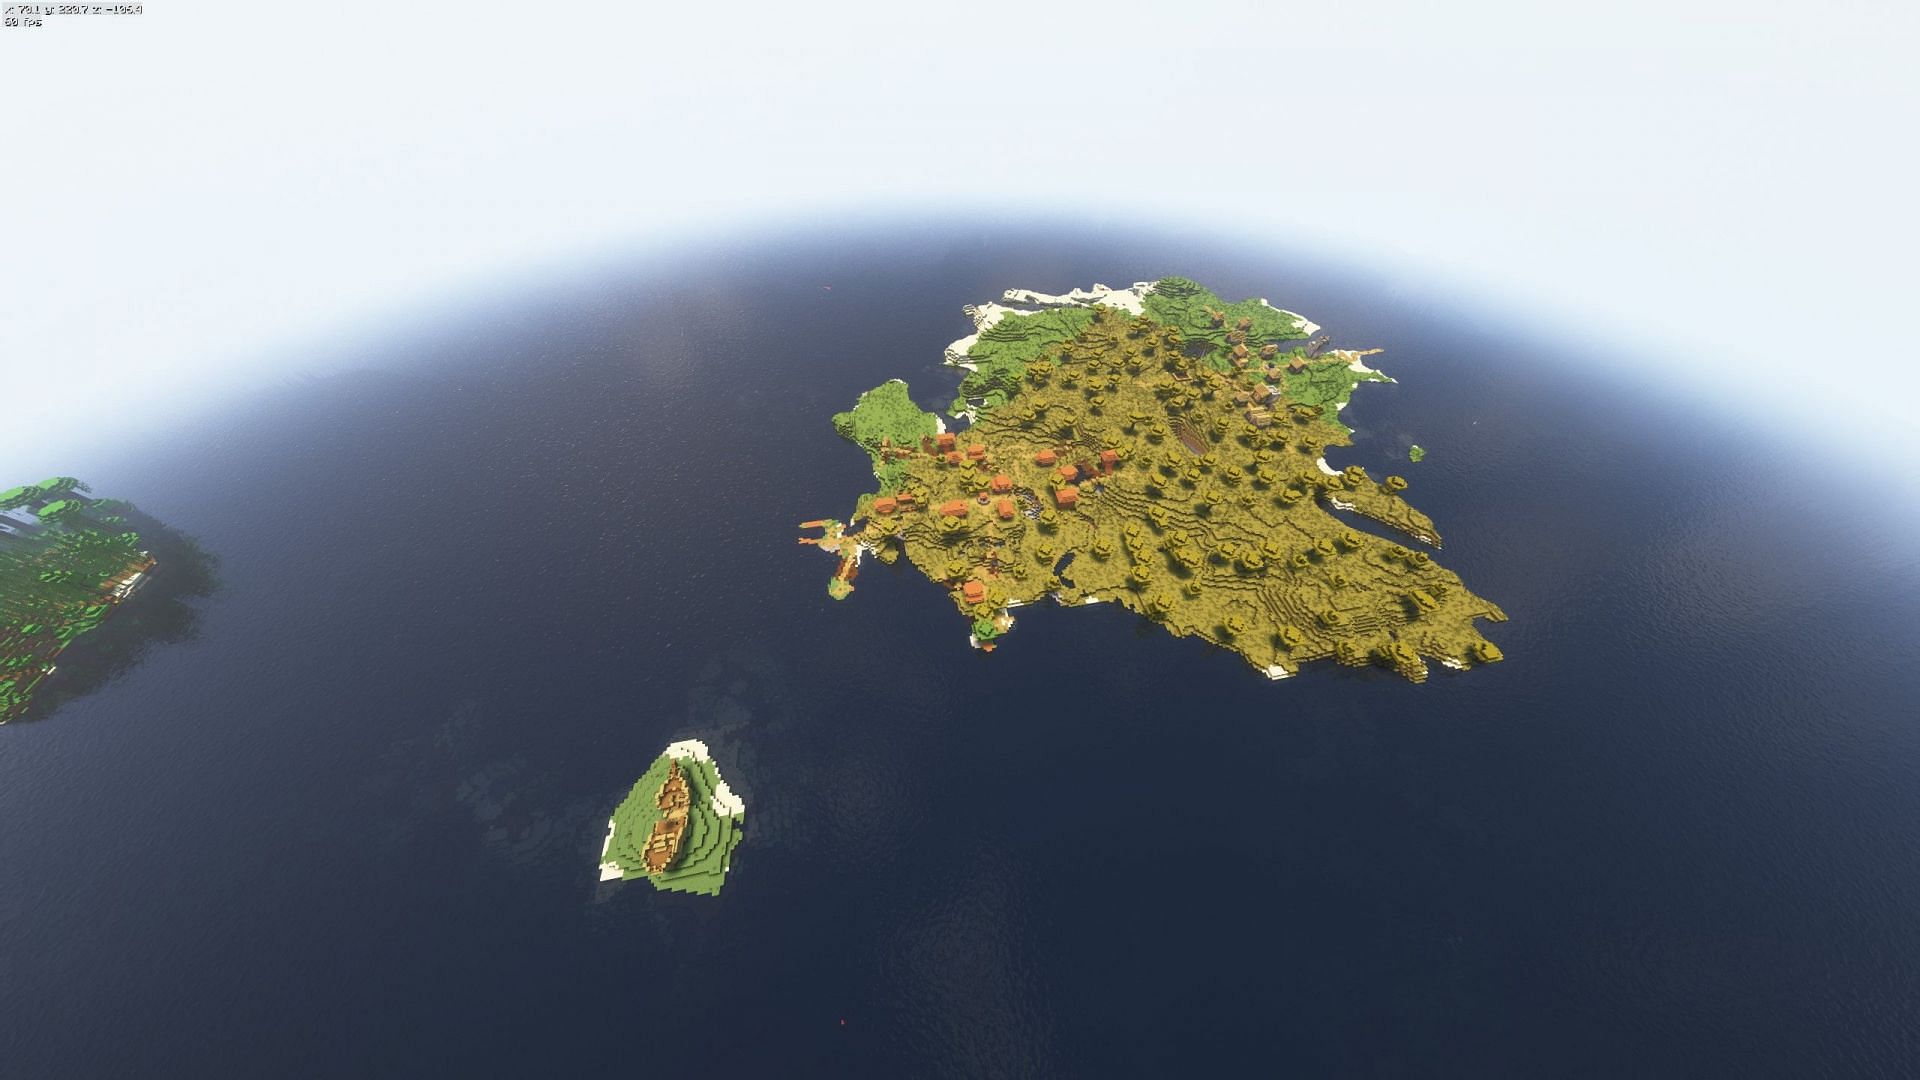 Island with two villages (Image via Reddit user stofix_)